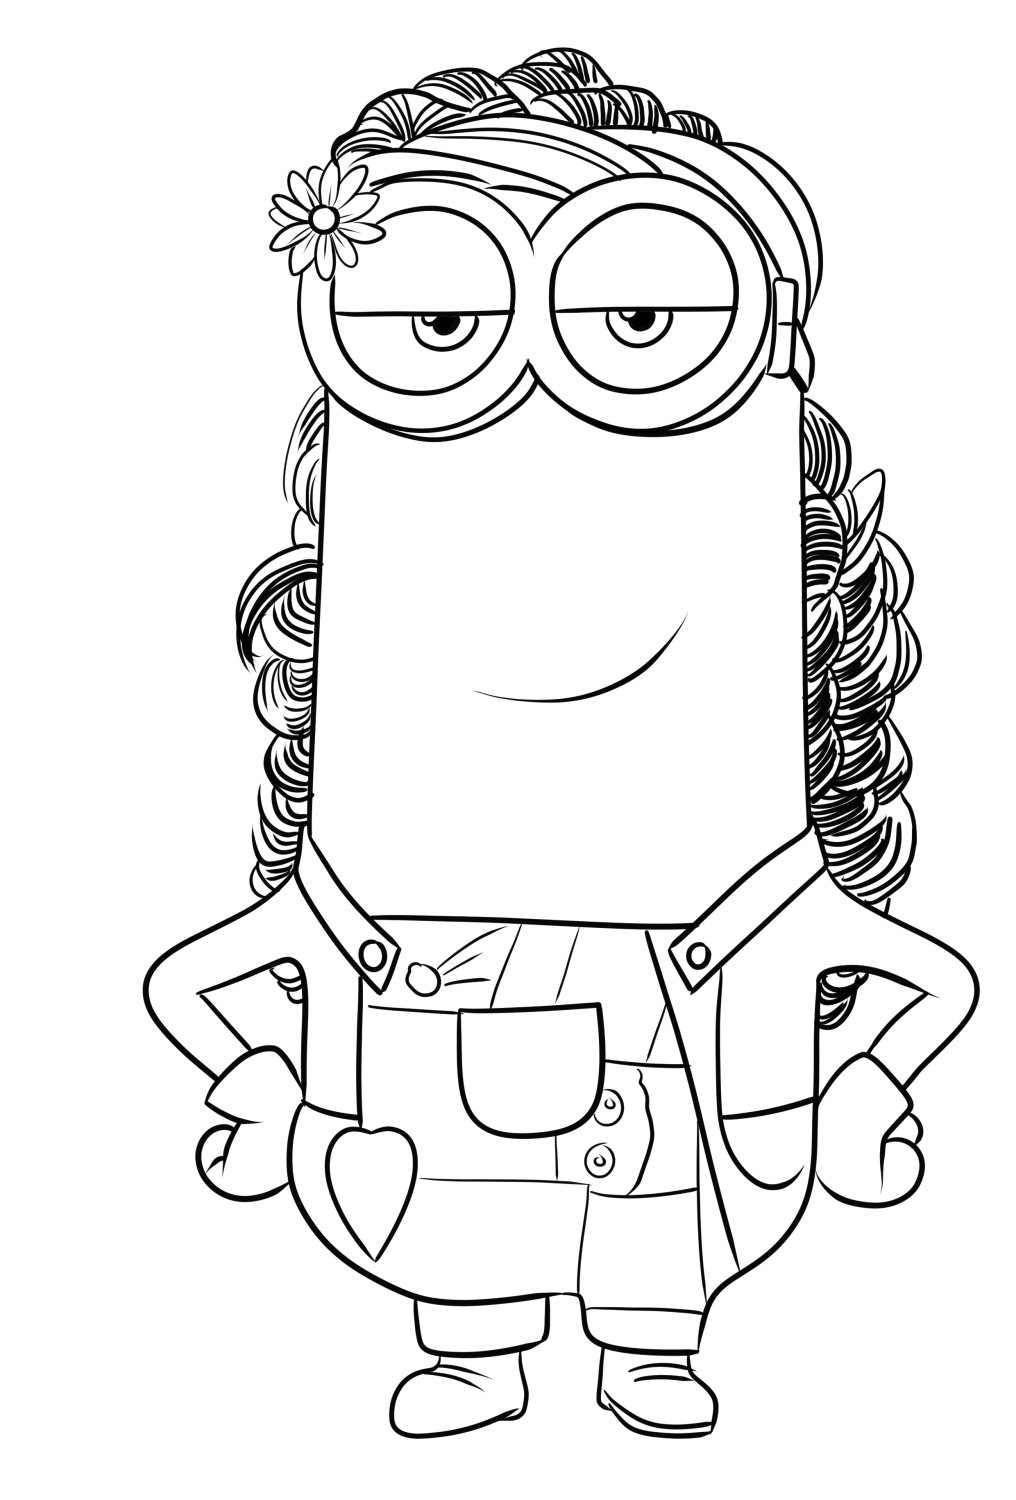 Kevin from Minions: The Rise of Gru coloring page to print and coloring